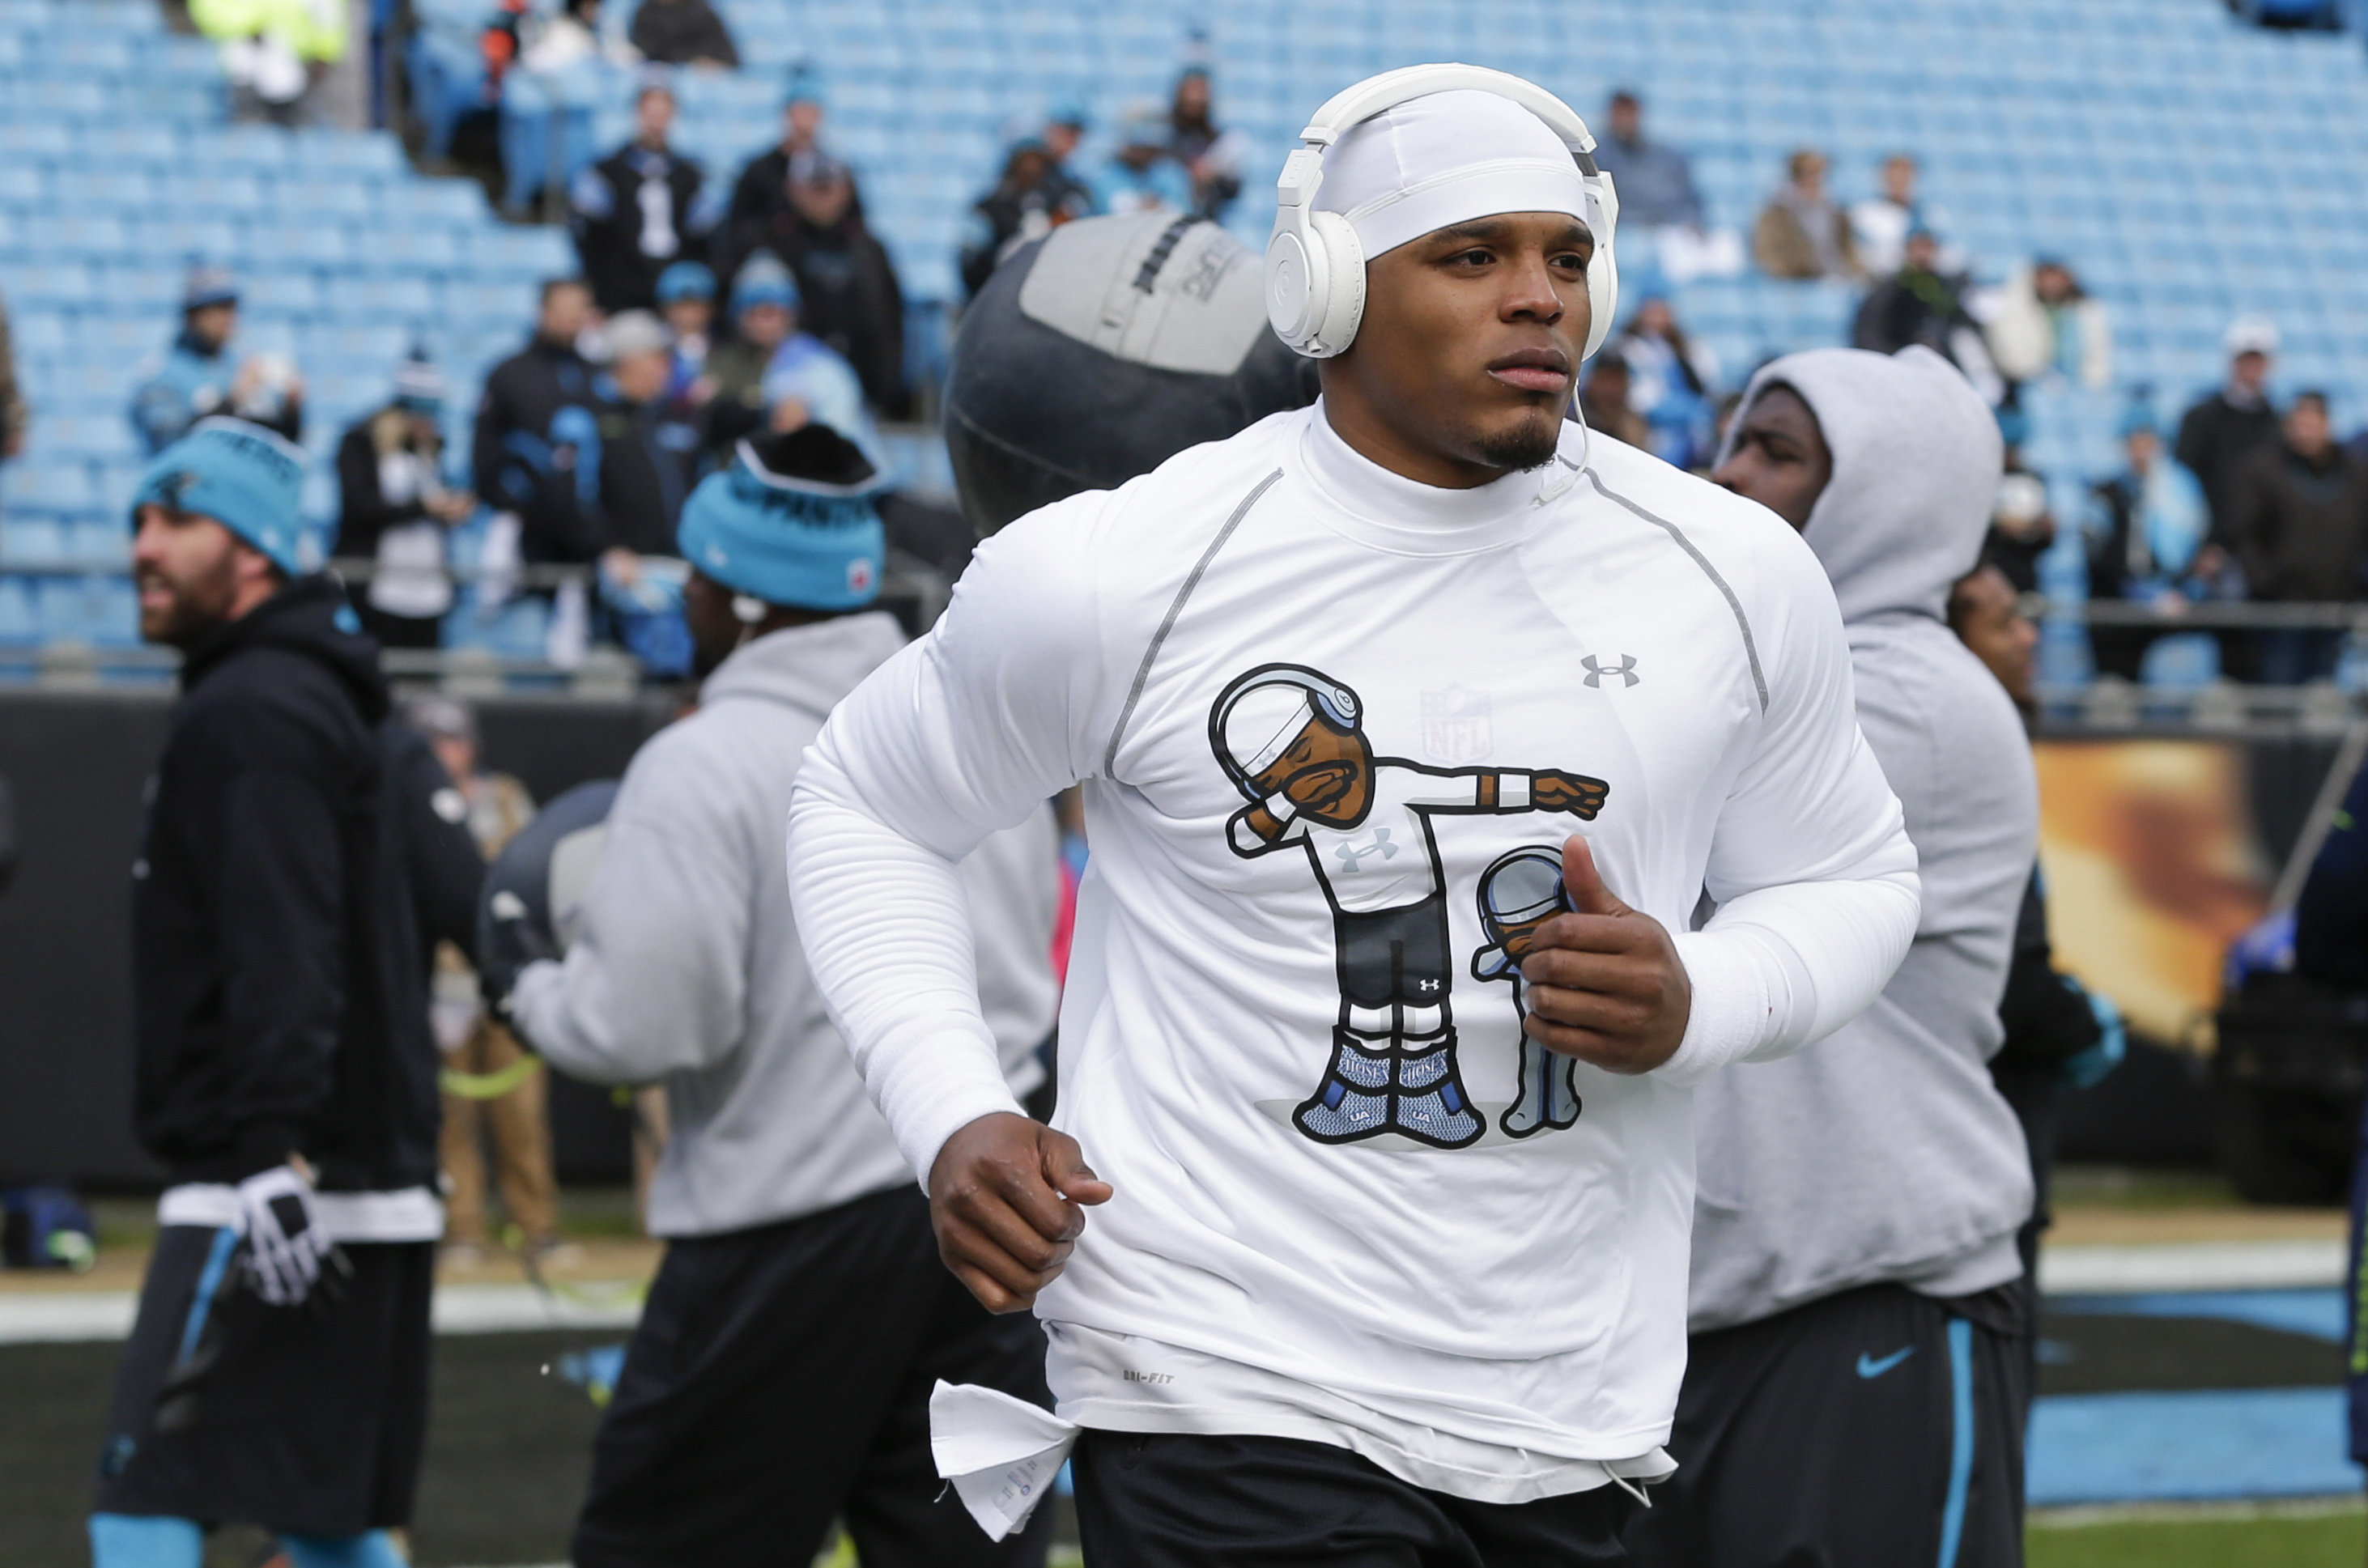 Jan 17, 2016; Charlotte, NC, USA; Carolina Panthers quarterback Cam Newton (1) runs onto the field prior to the game between the Seattle Seahawks and Carolina Panthers in a NFC Divisional round playoff game at Bank of America Stadium. Mandatory Credit: Jeremy Brevard-USA TODAY Sports ORG XMIT: USATSI-245816 ORIG FILE ID: 20160117_sal_bb4_012.JPG